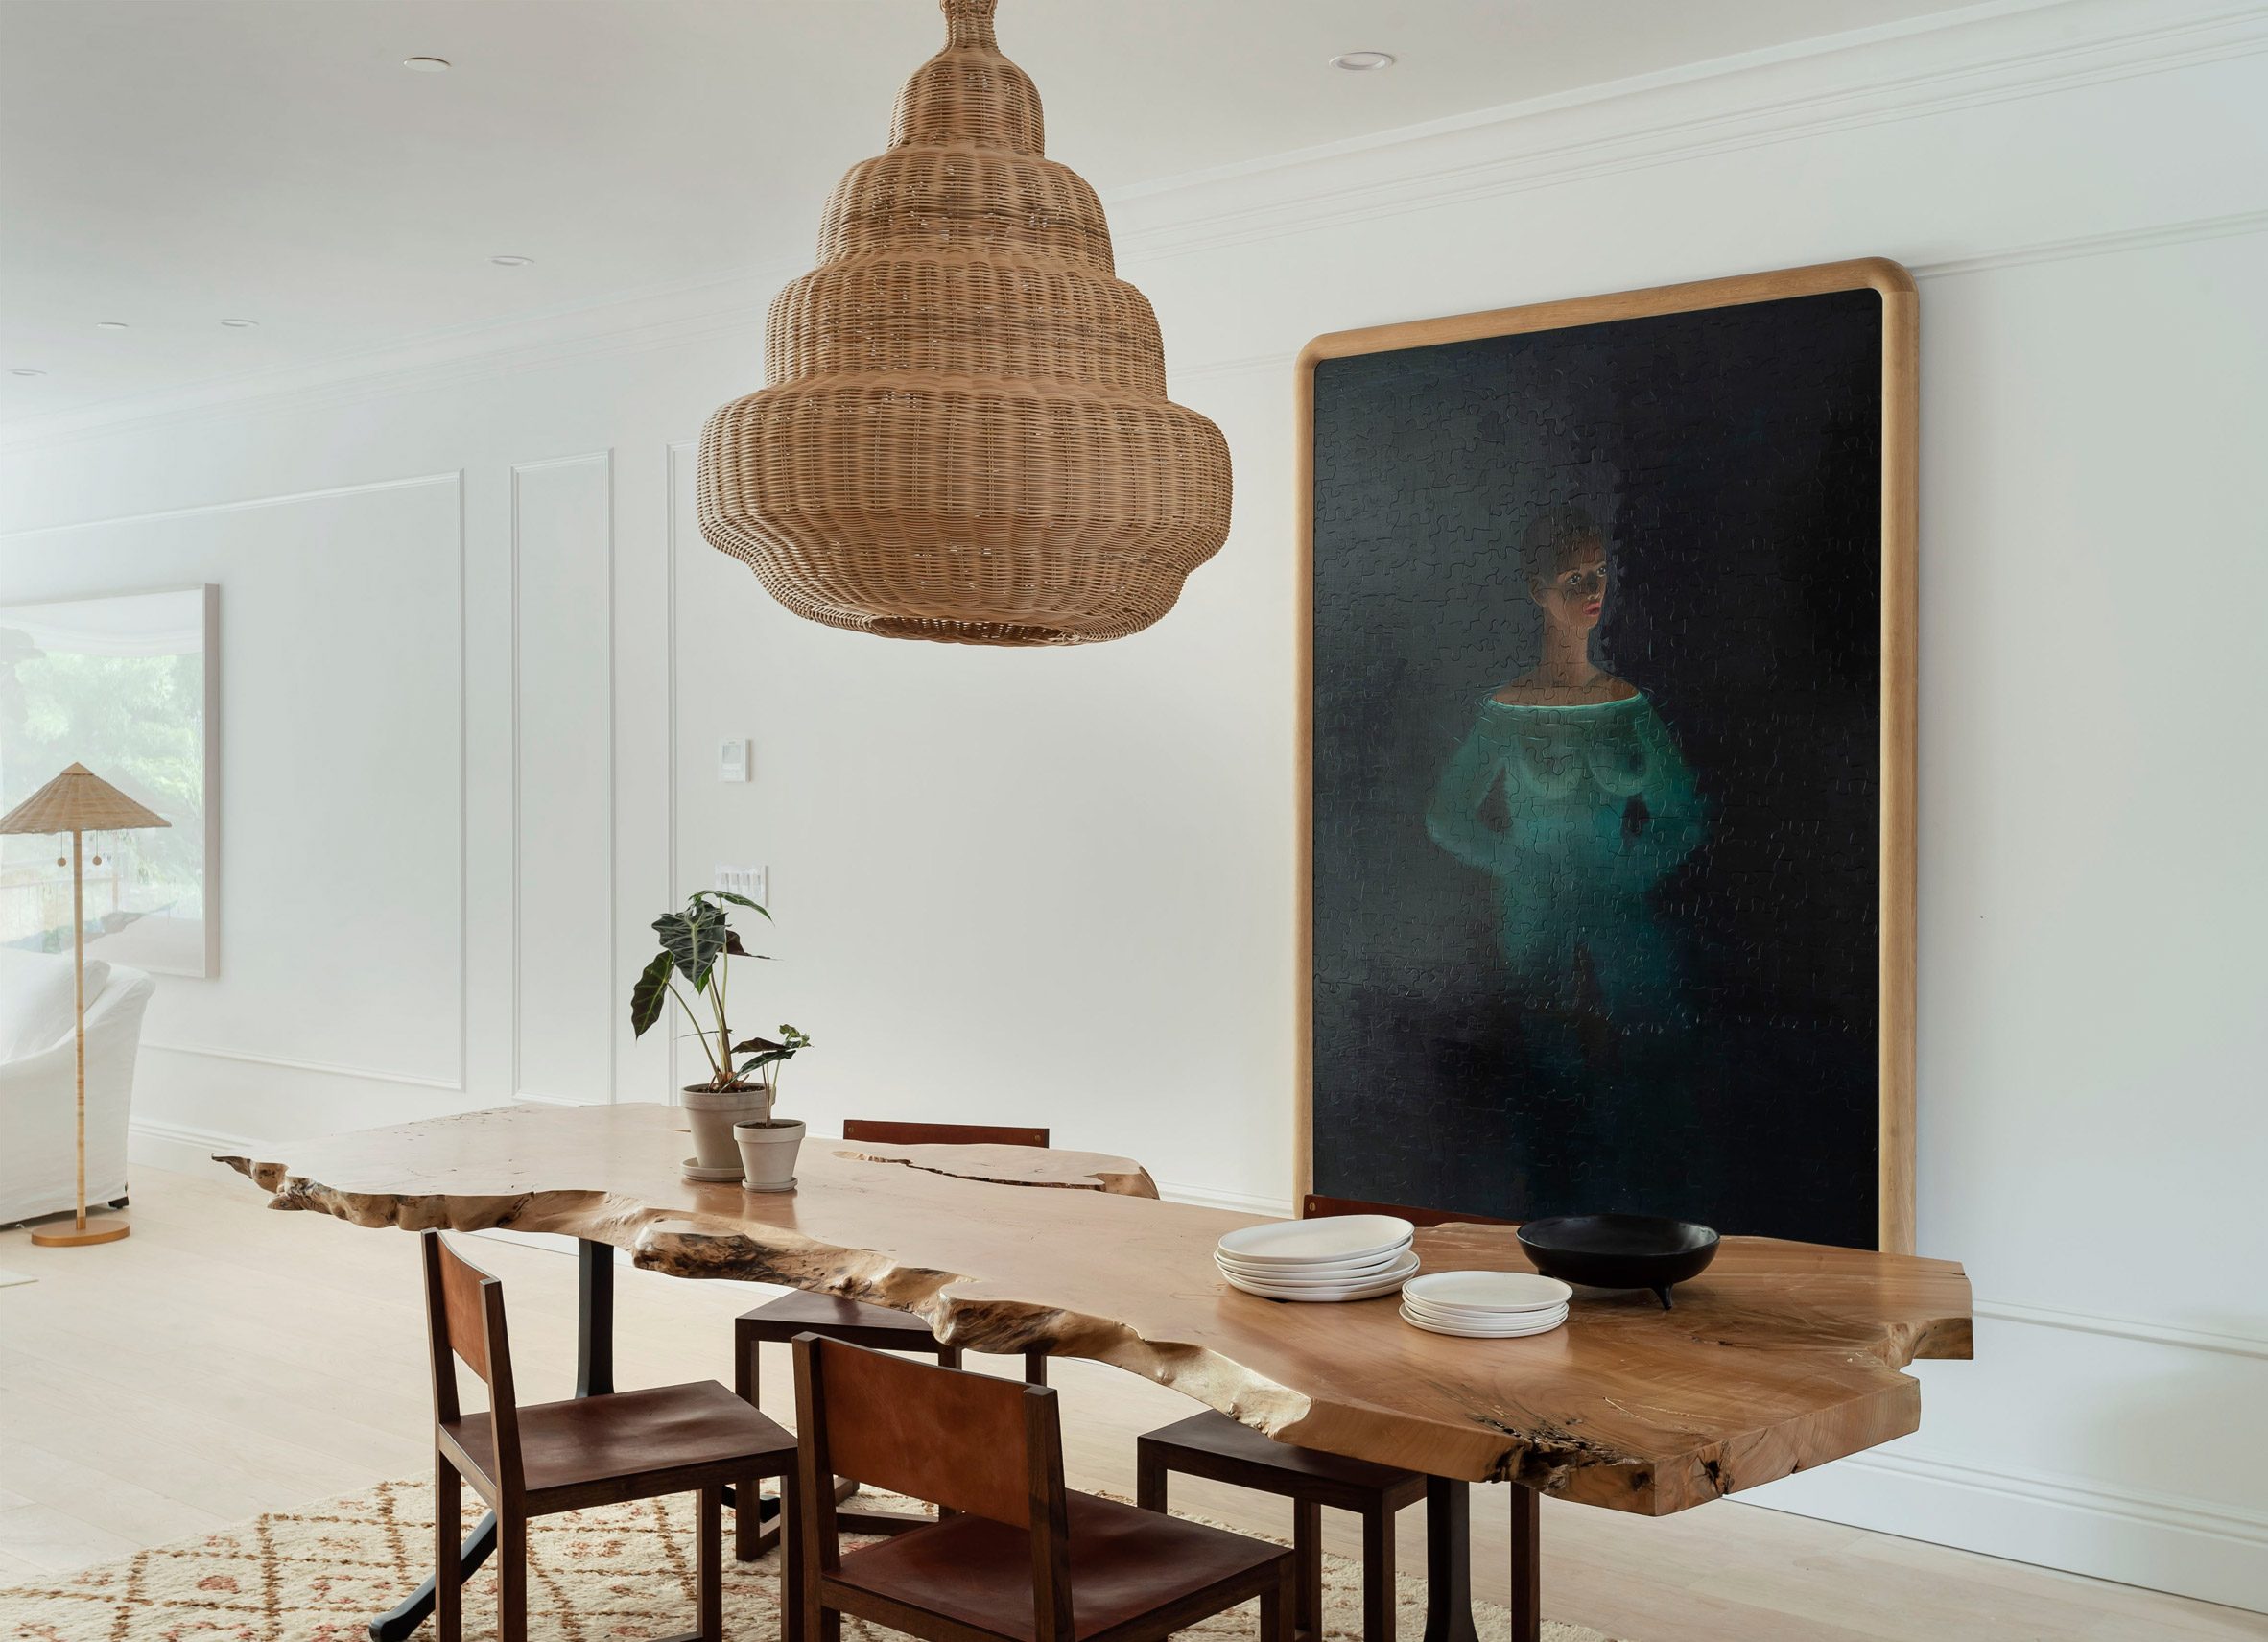 The Sackett Street townhouse's dining room with bespoke table and artwork